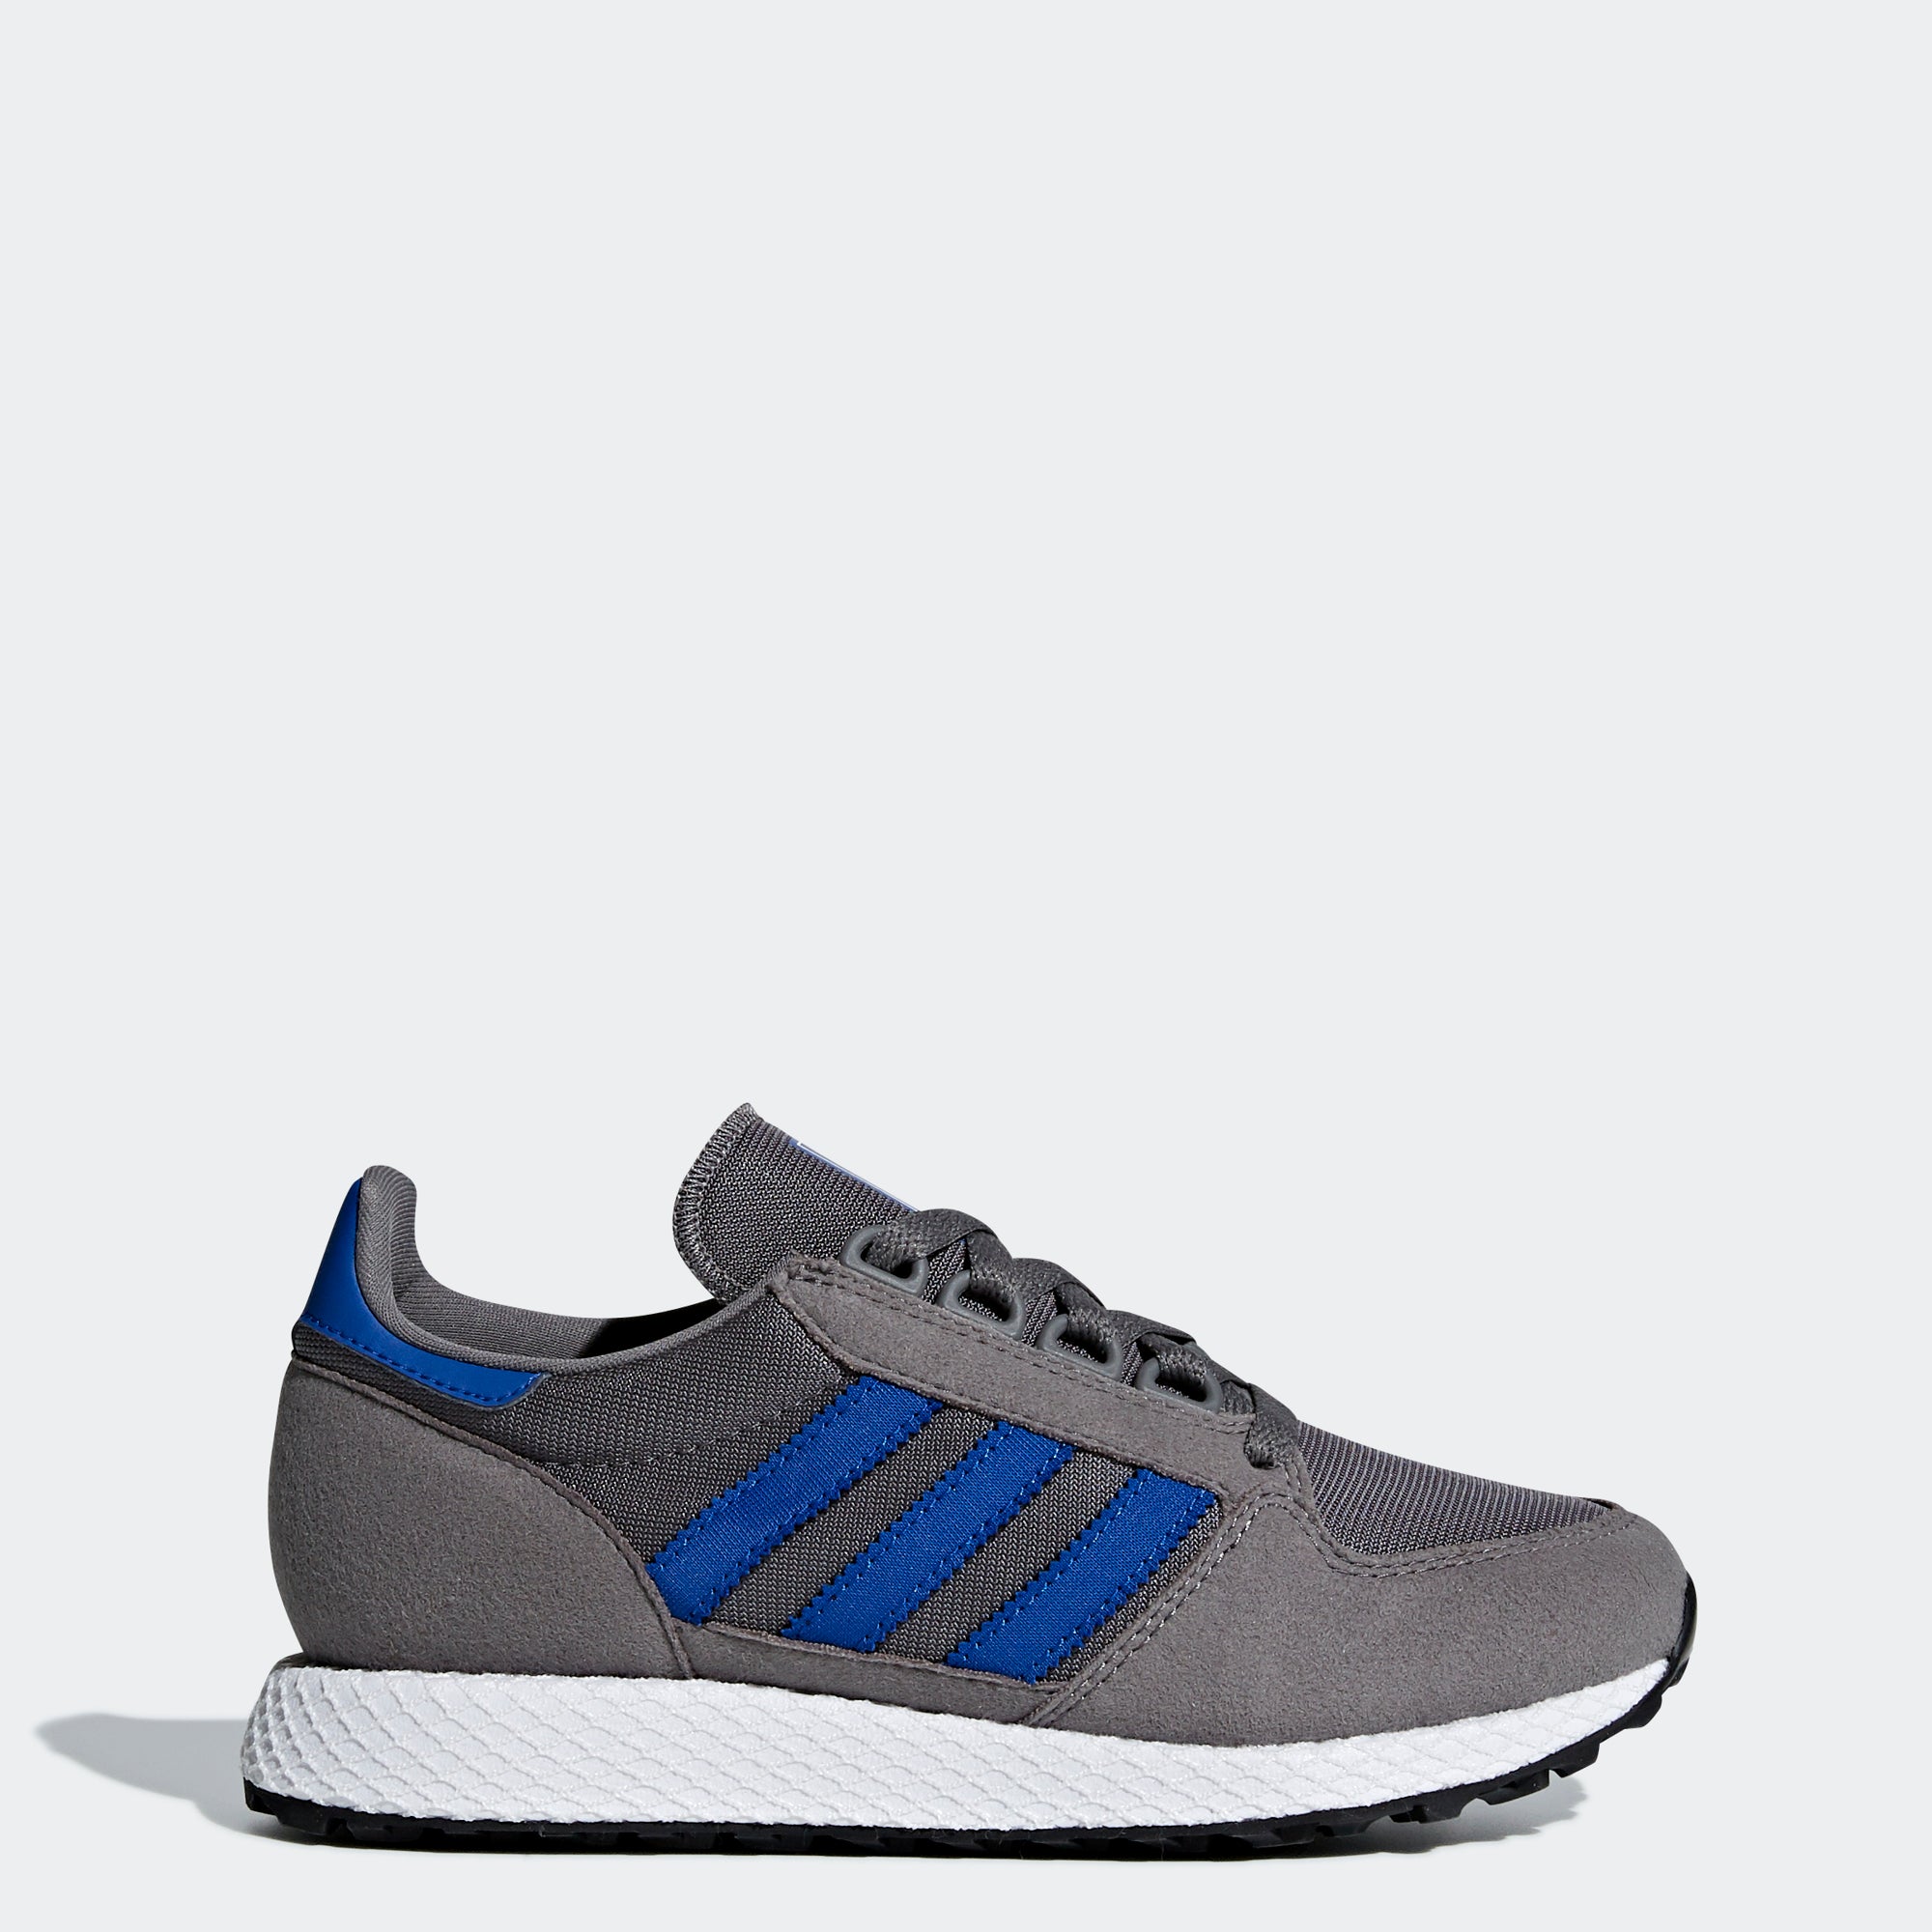 adidas forest grove gray